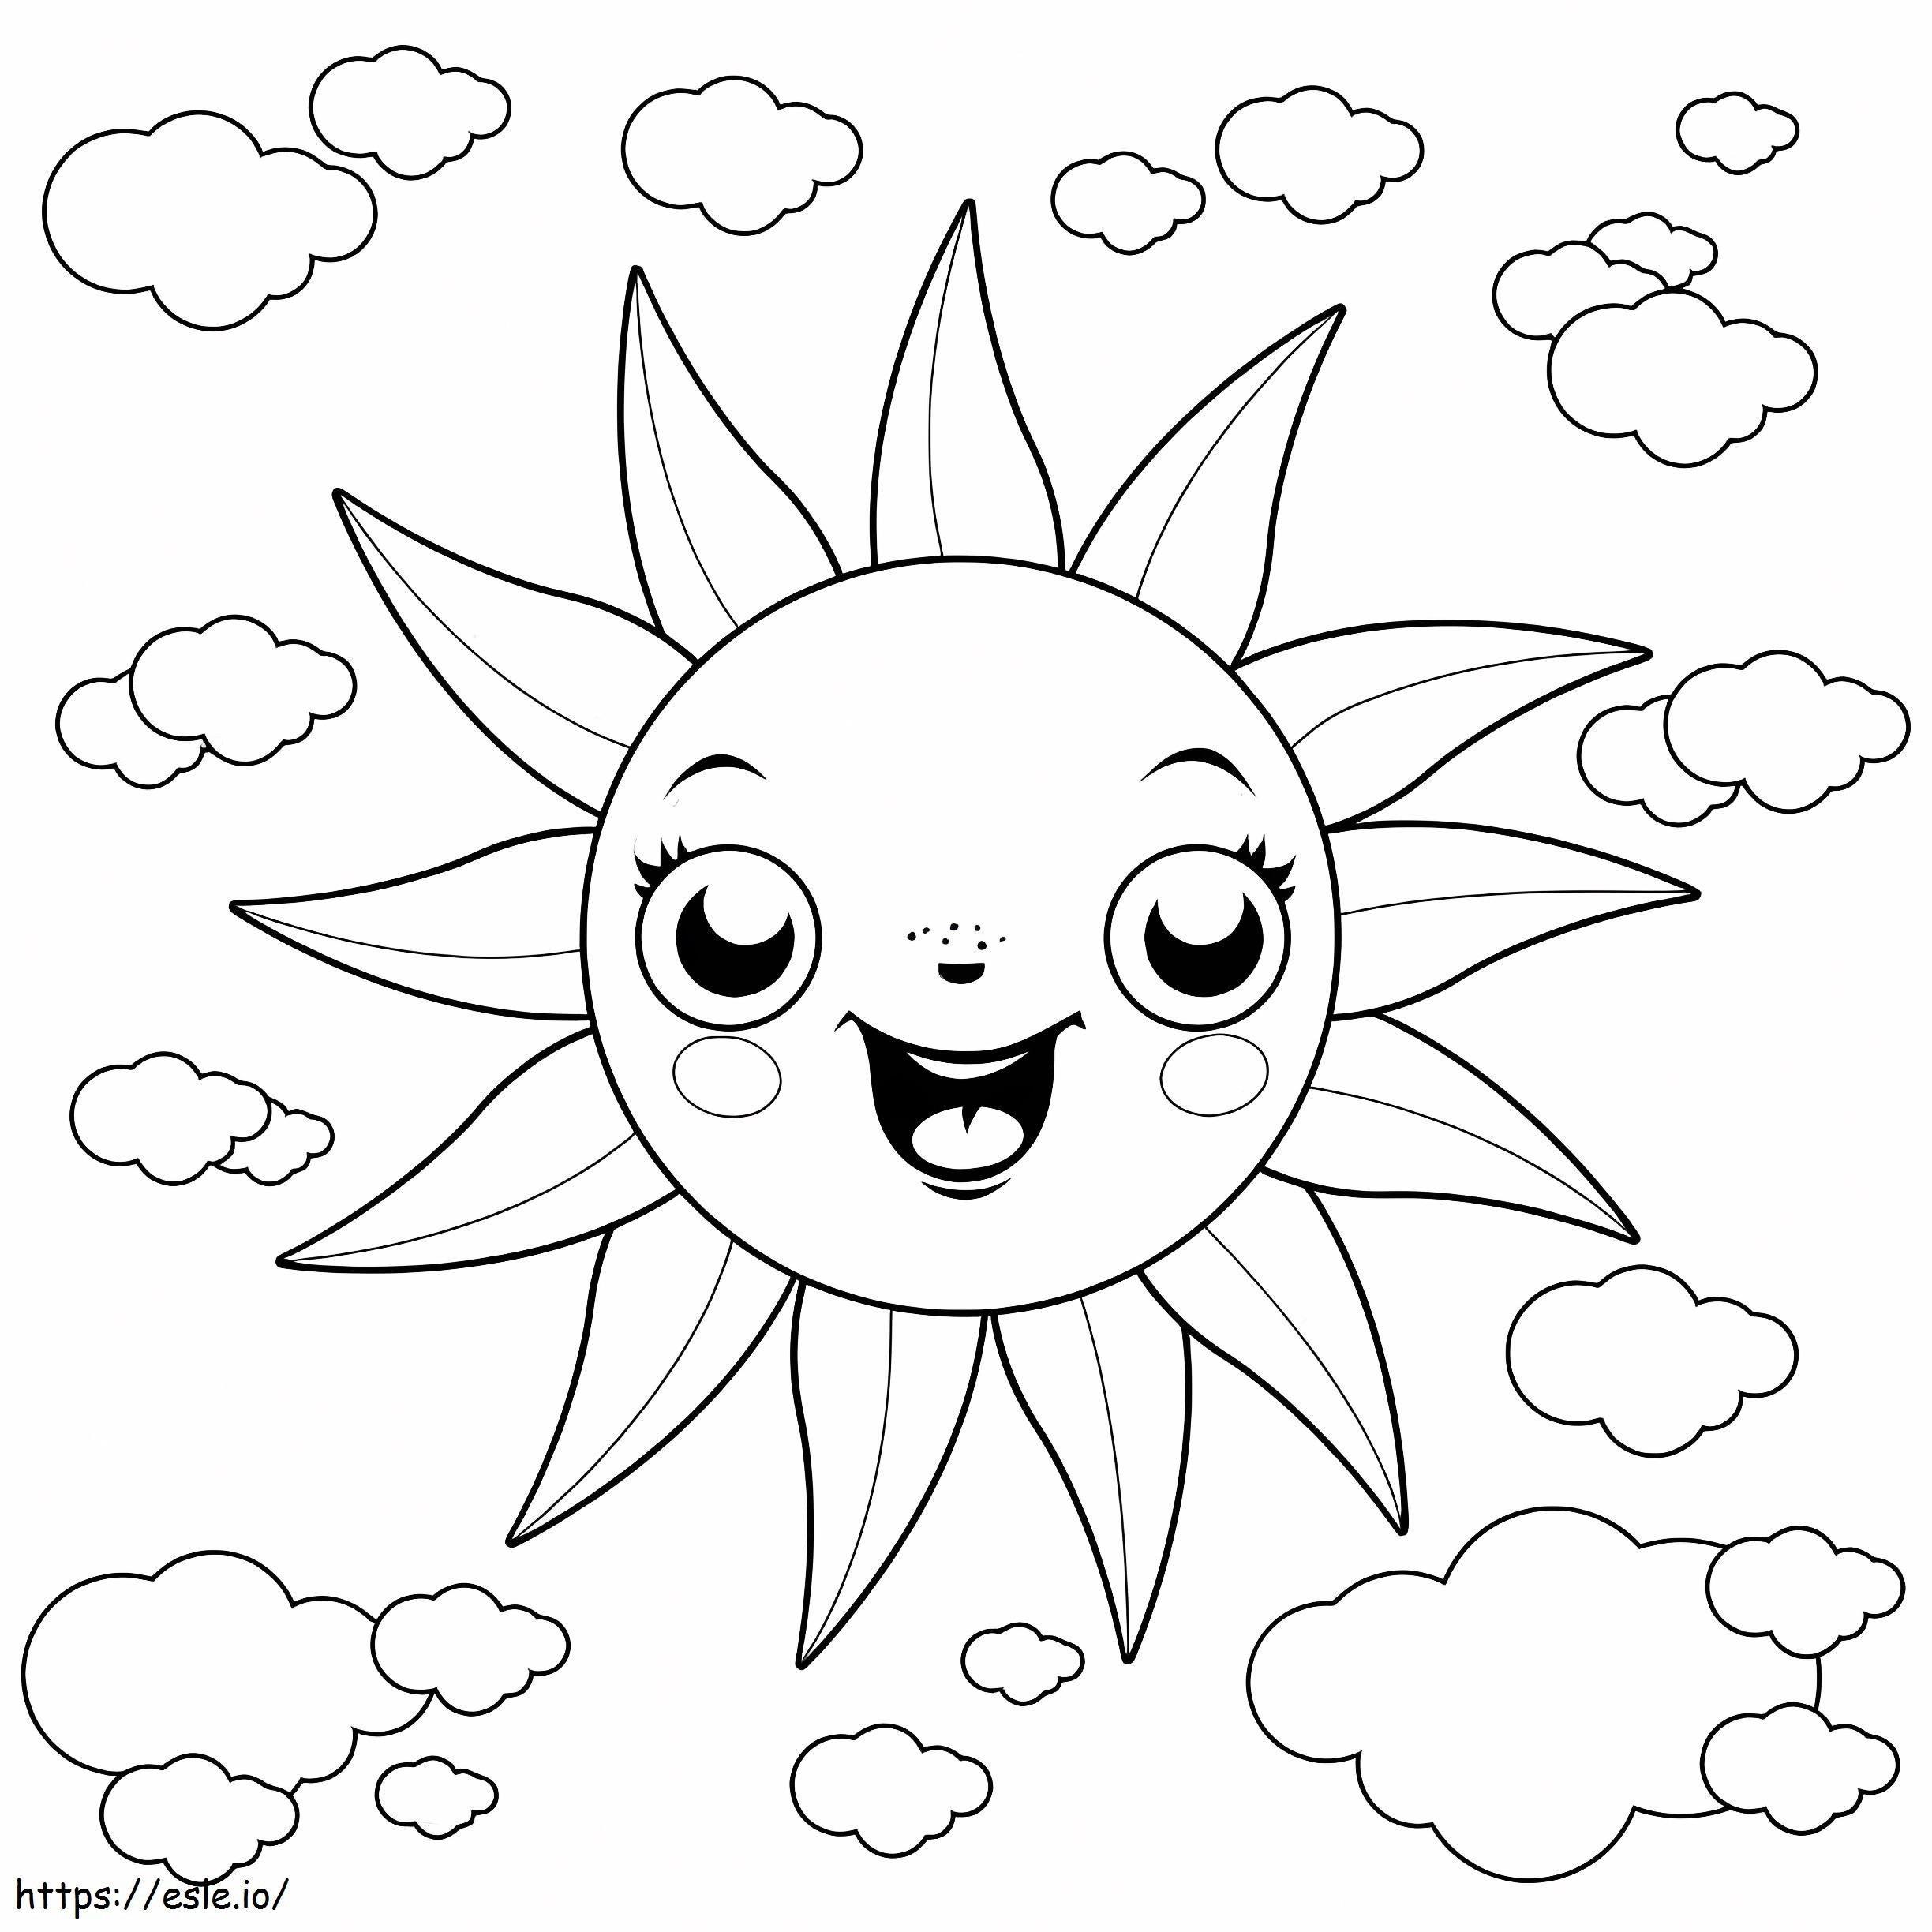 Nice Sun With Clouds coloring page